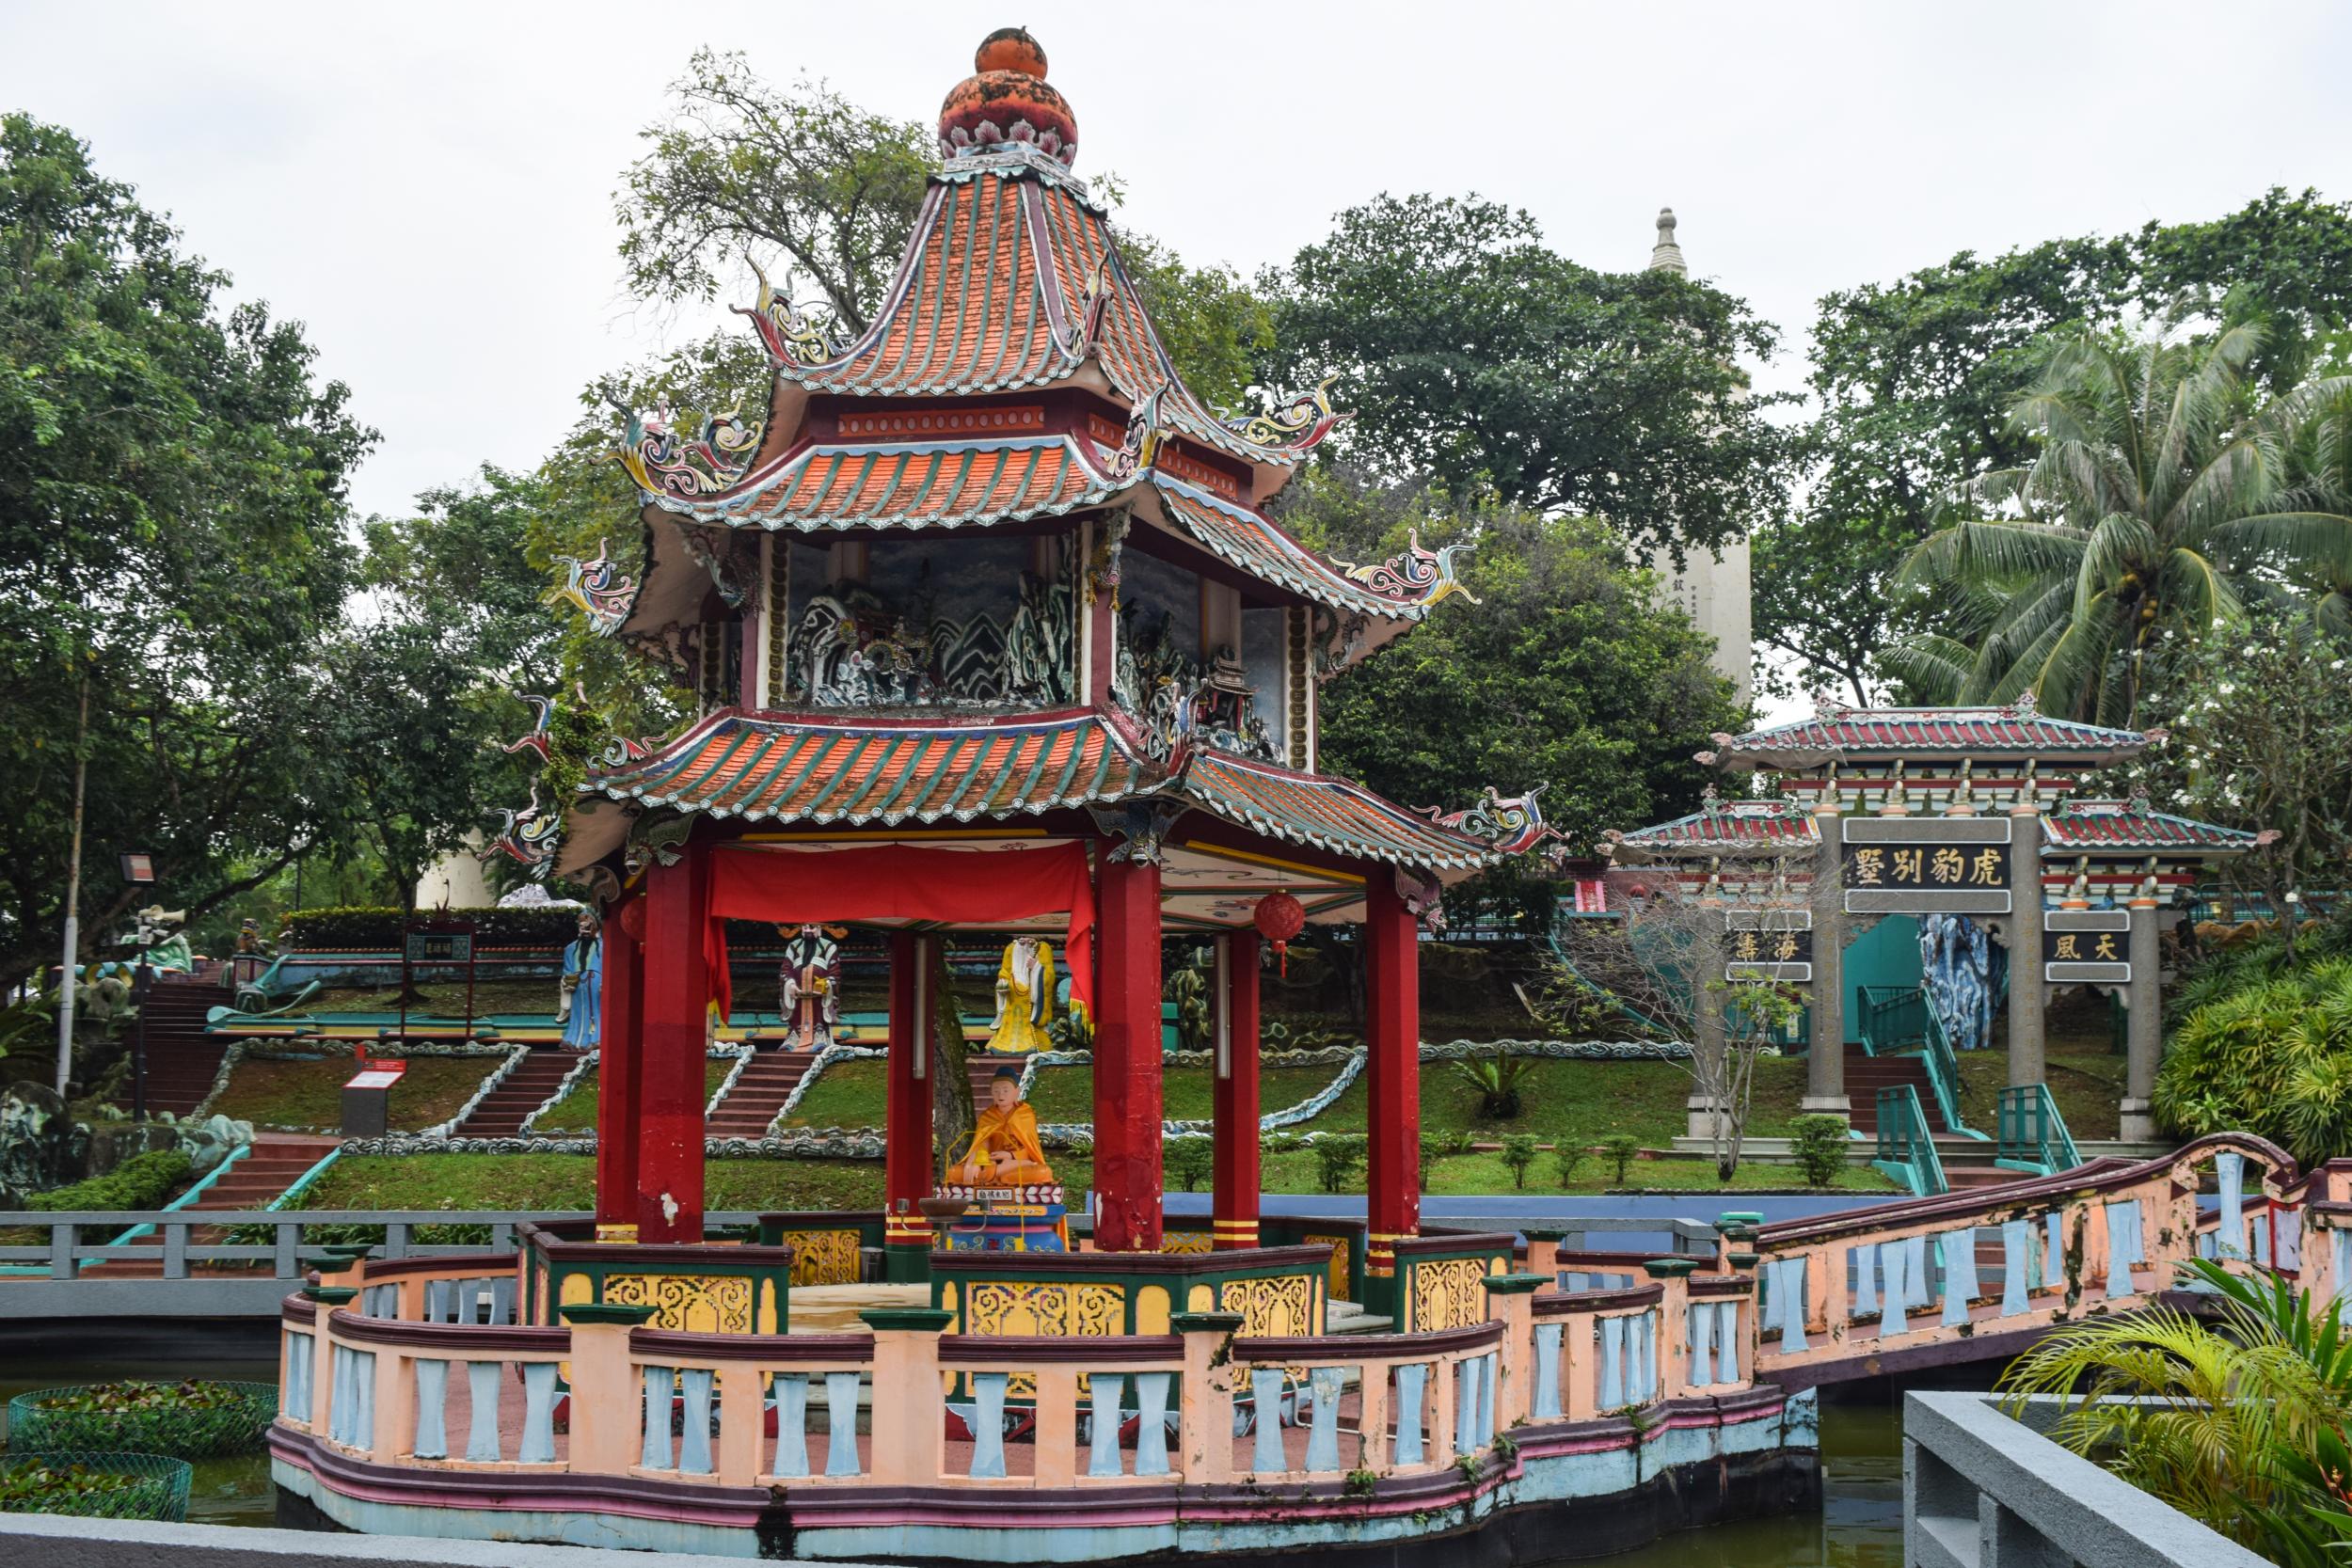 Haw Par Villa was designed to teach visitors about traditional Chinese values